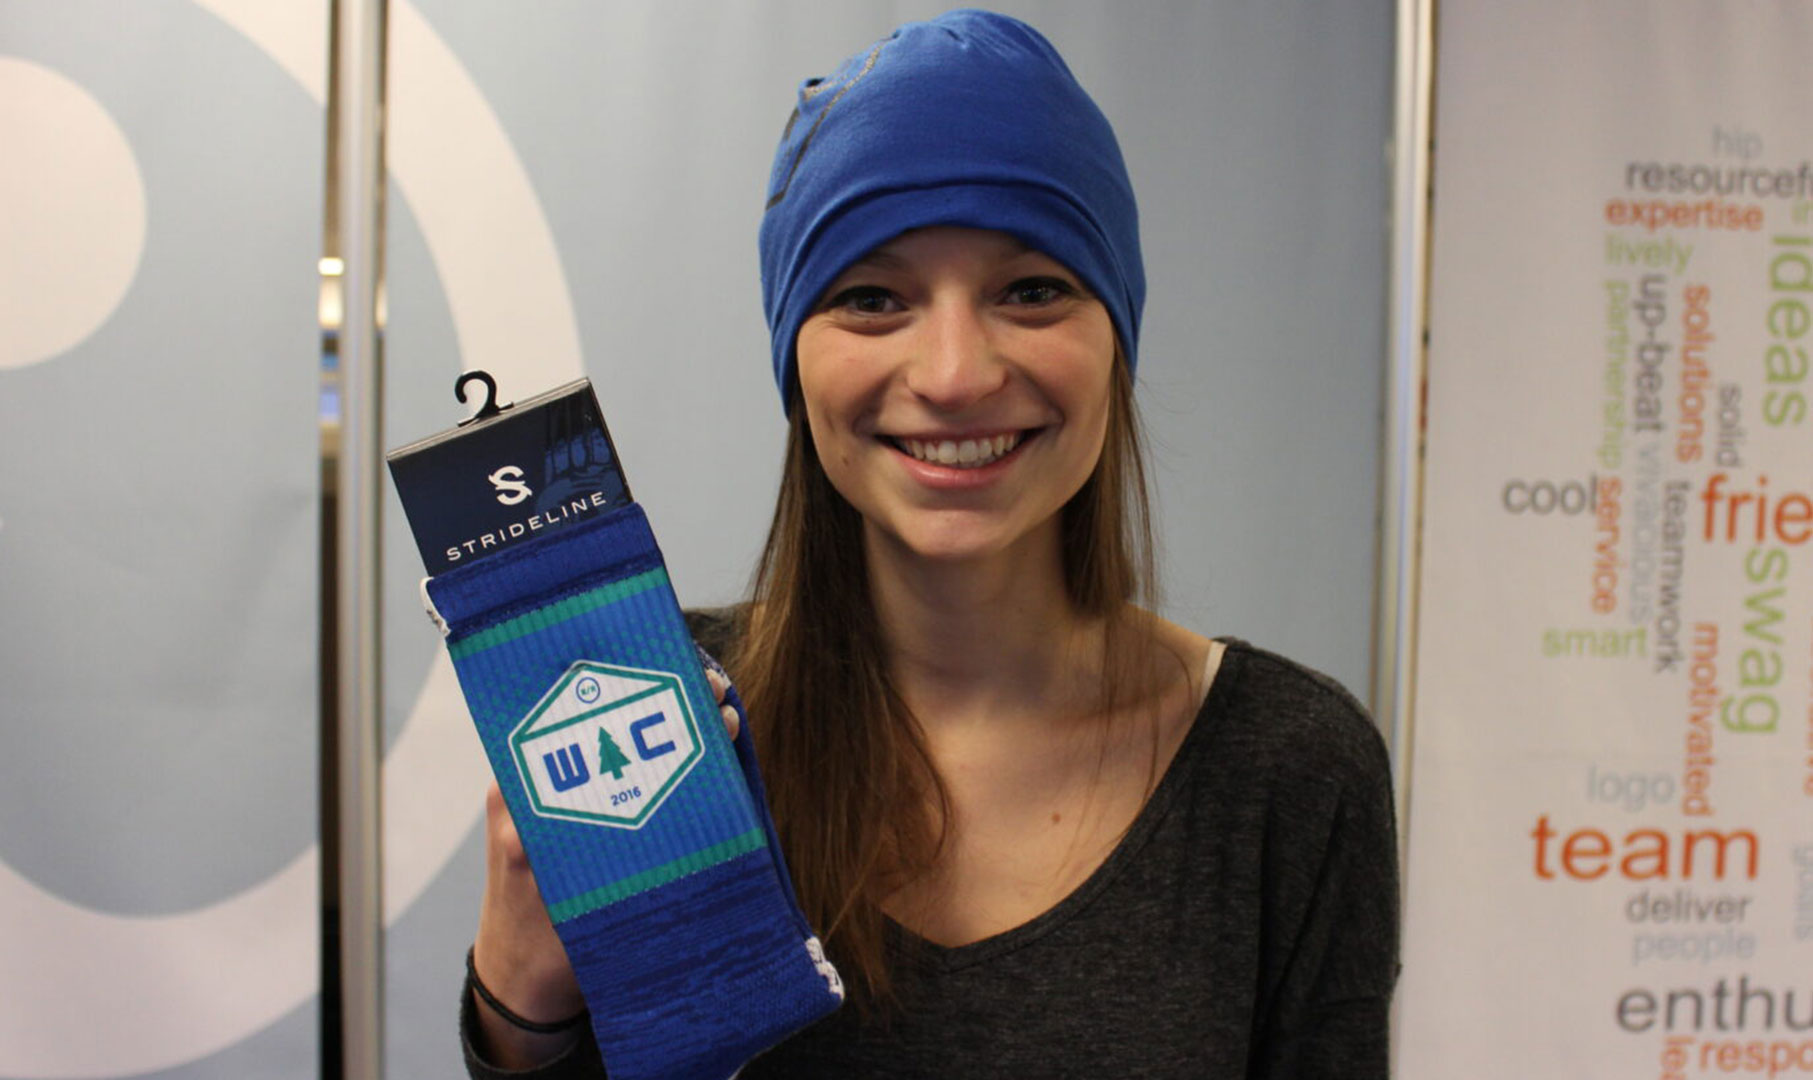 Image of woman holding socks and wearing blue beanie.